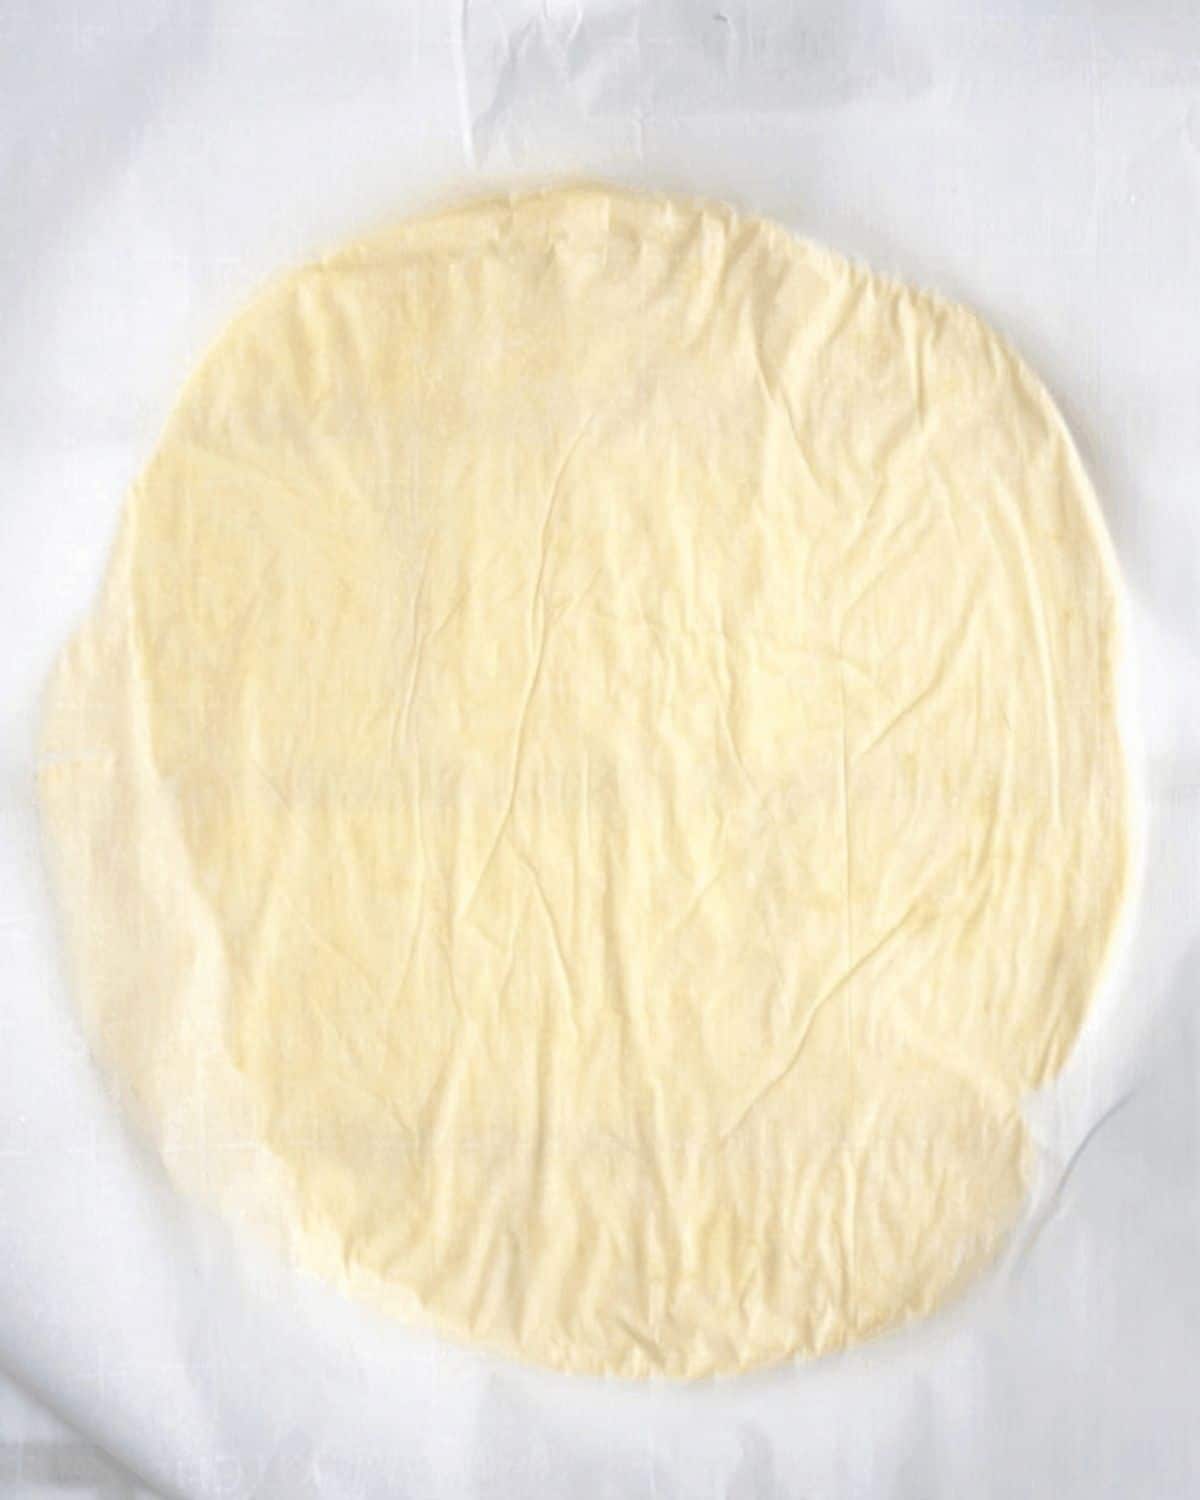 The dough rolled out into an 8-inch wide circle in between two pieces of parchment paper.